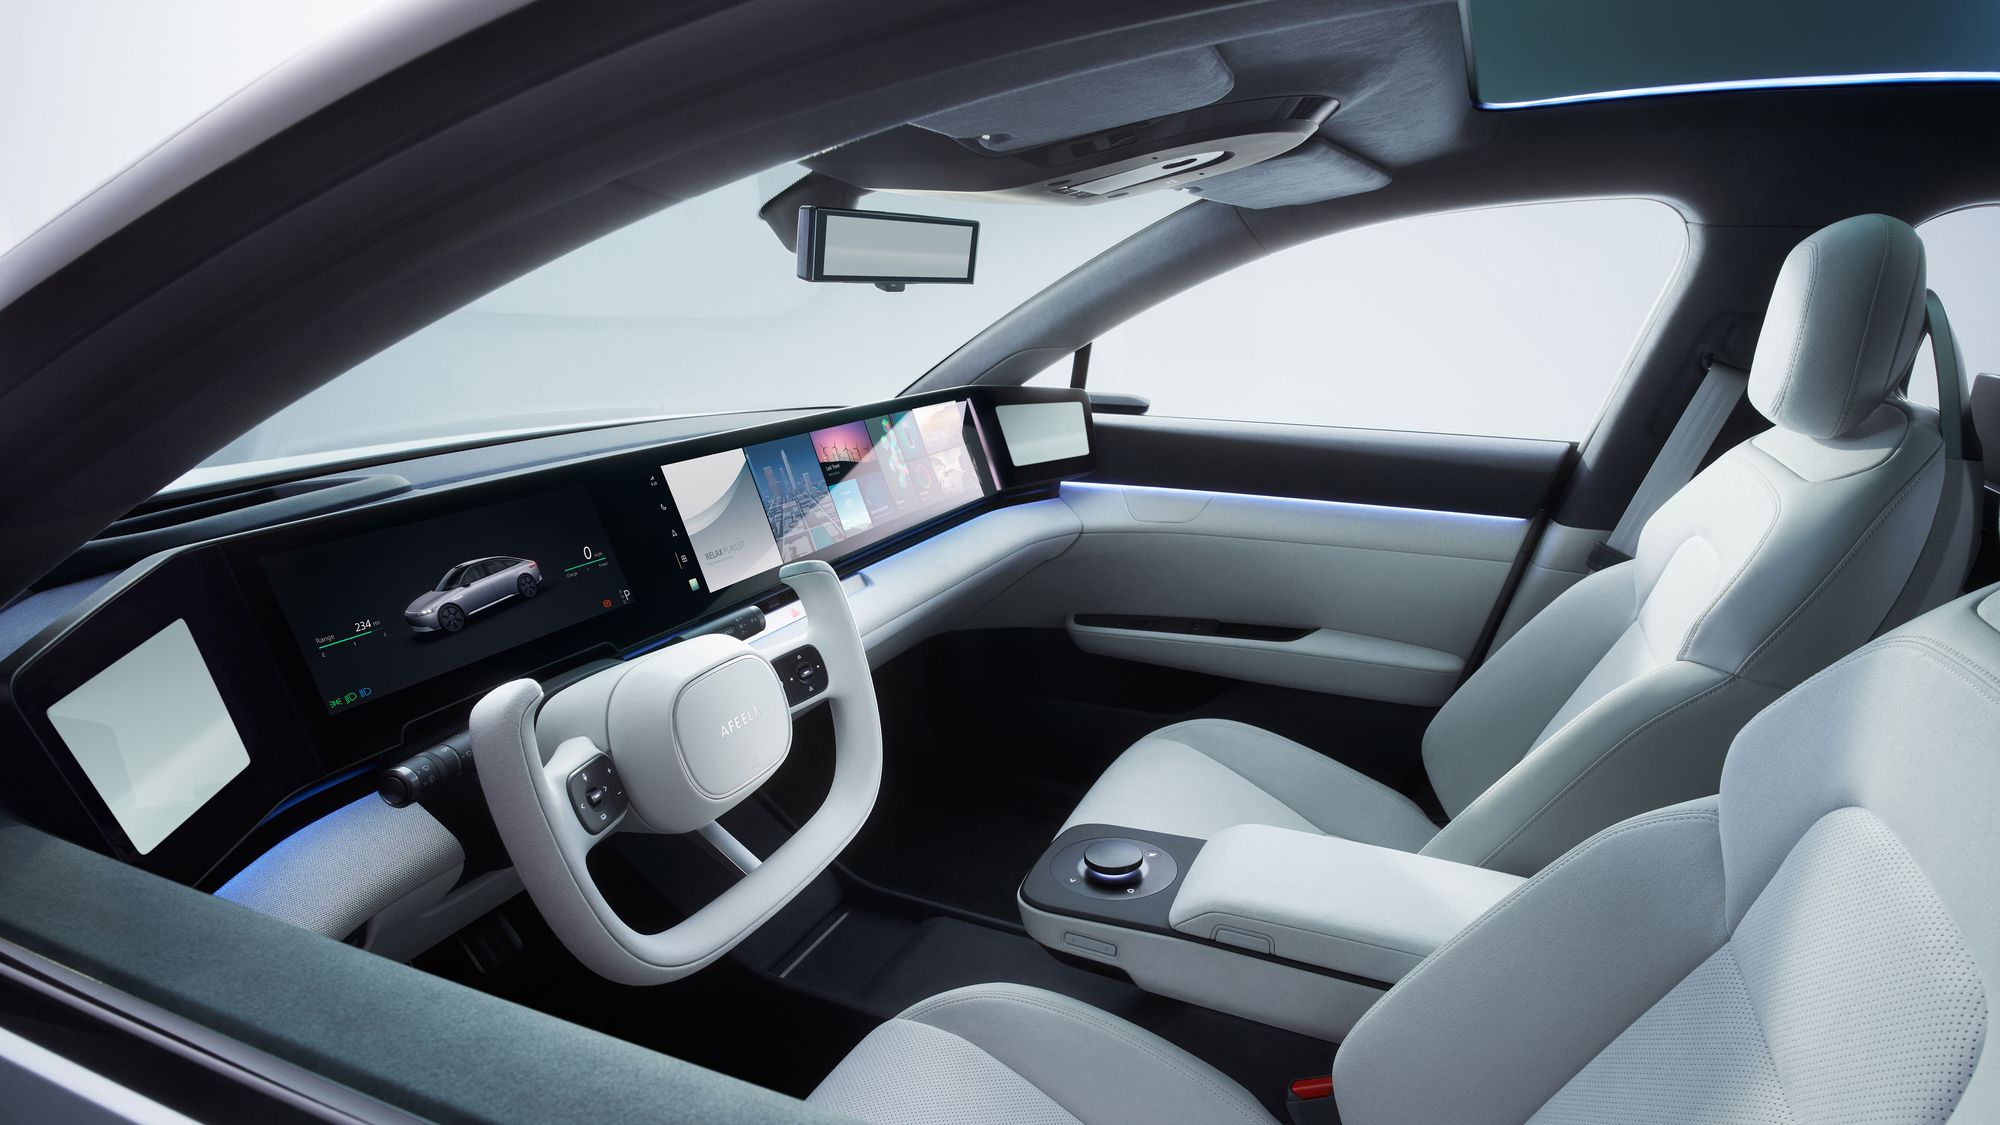 The cabin space of Afeela, the concept car developed by Sony and Honda.